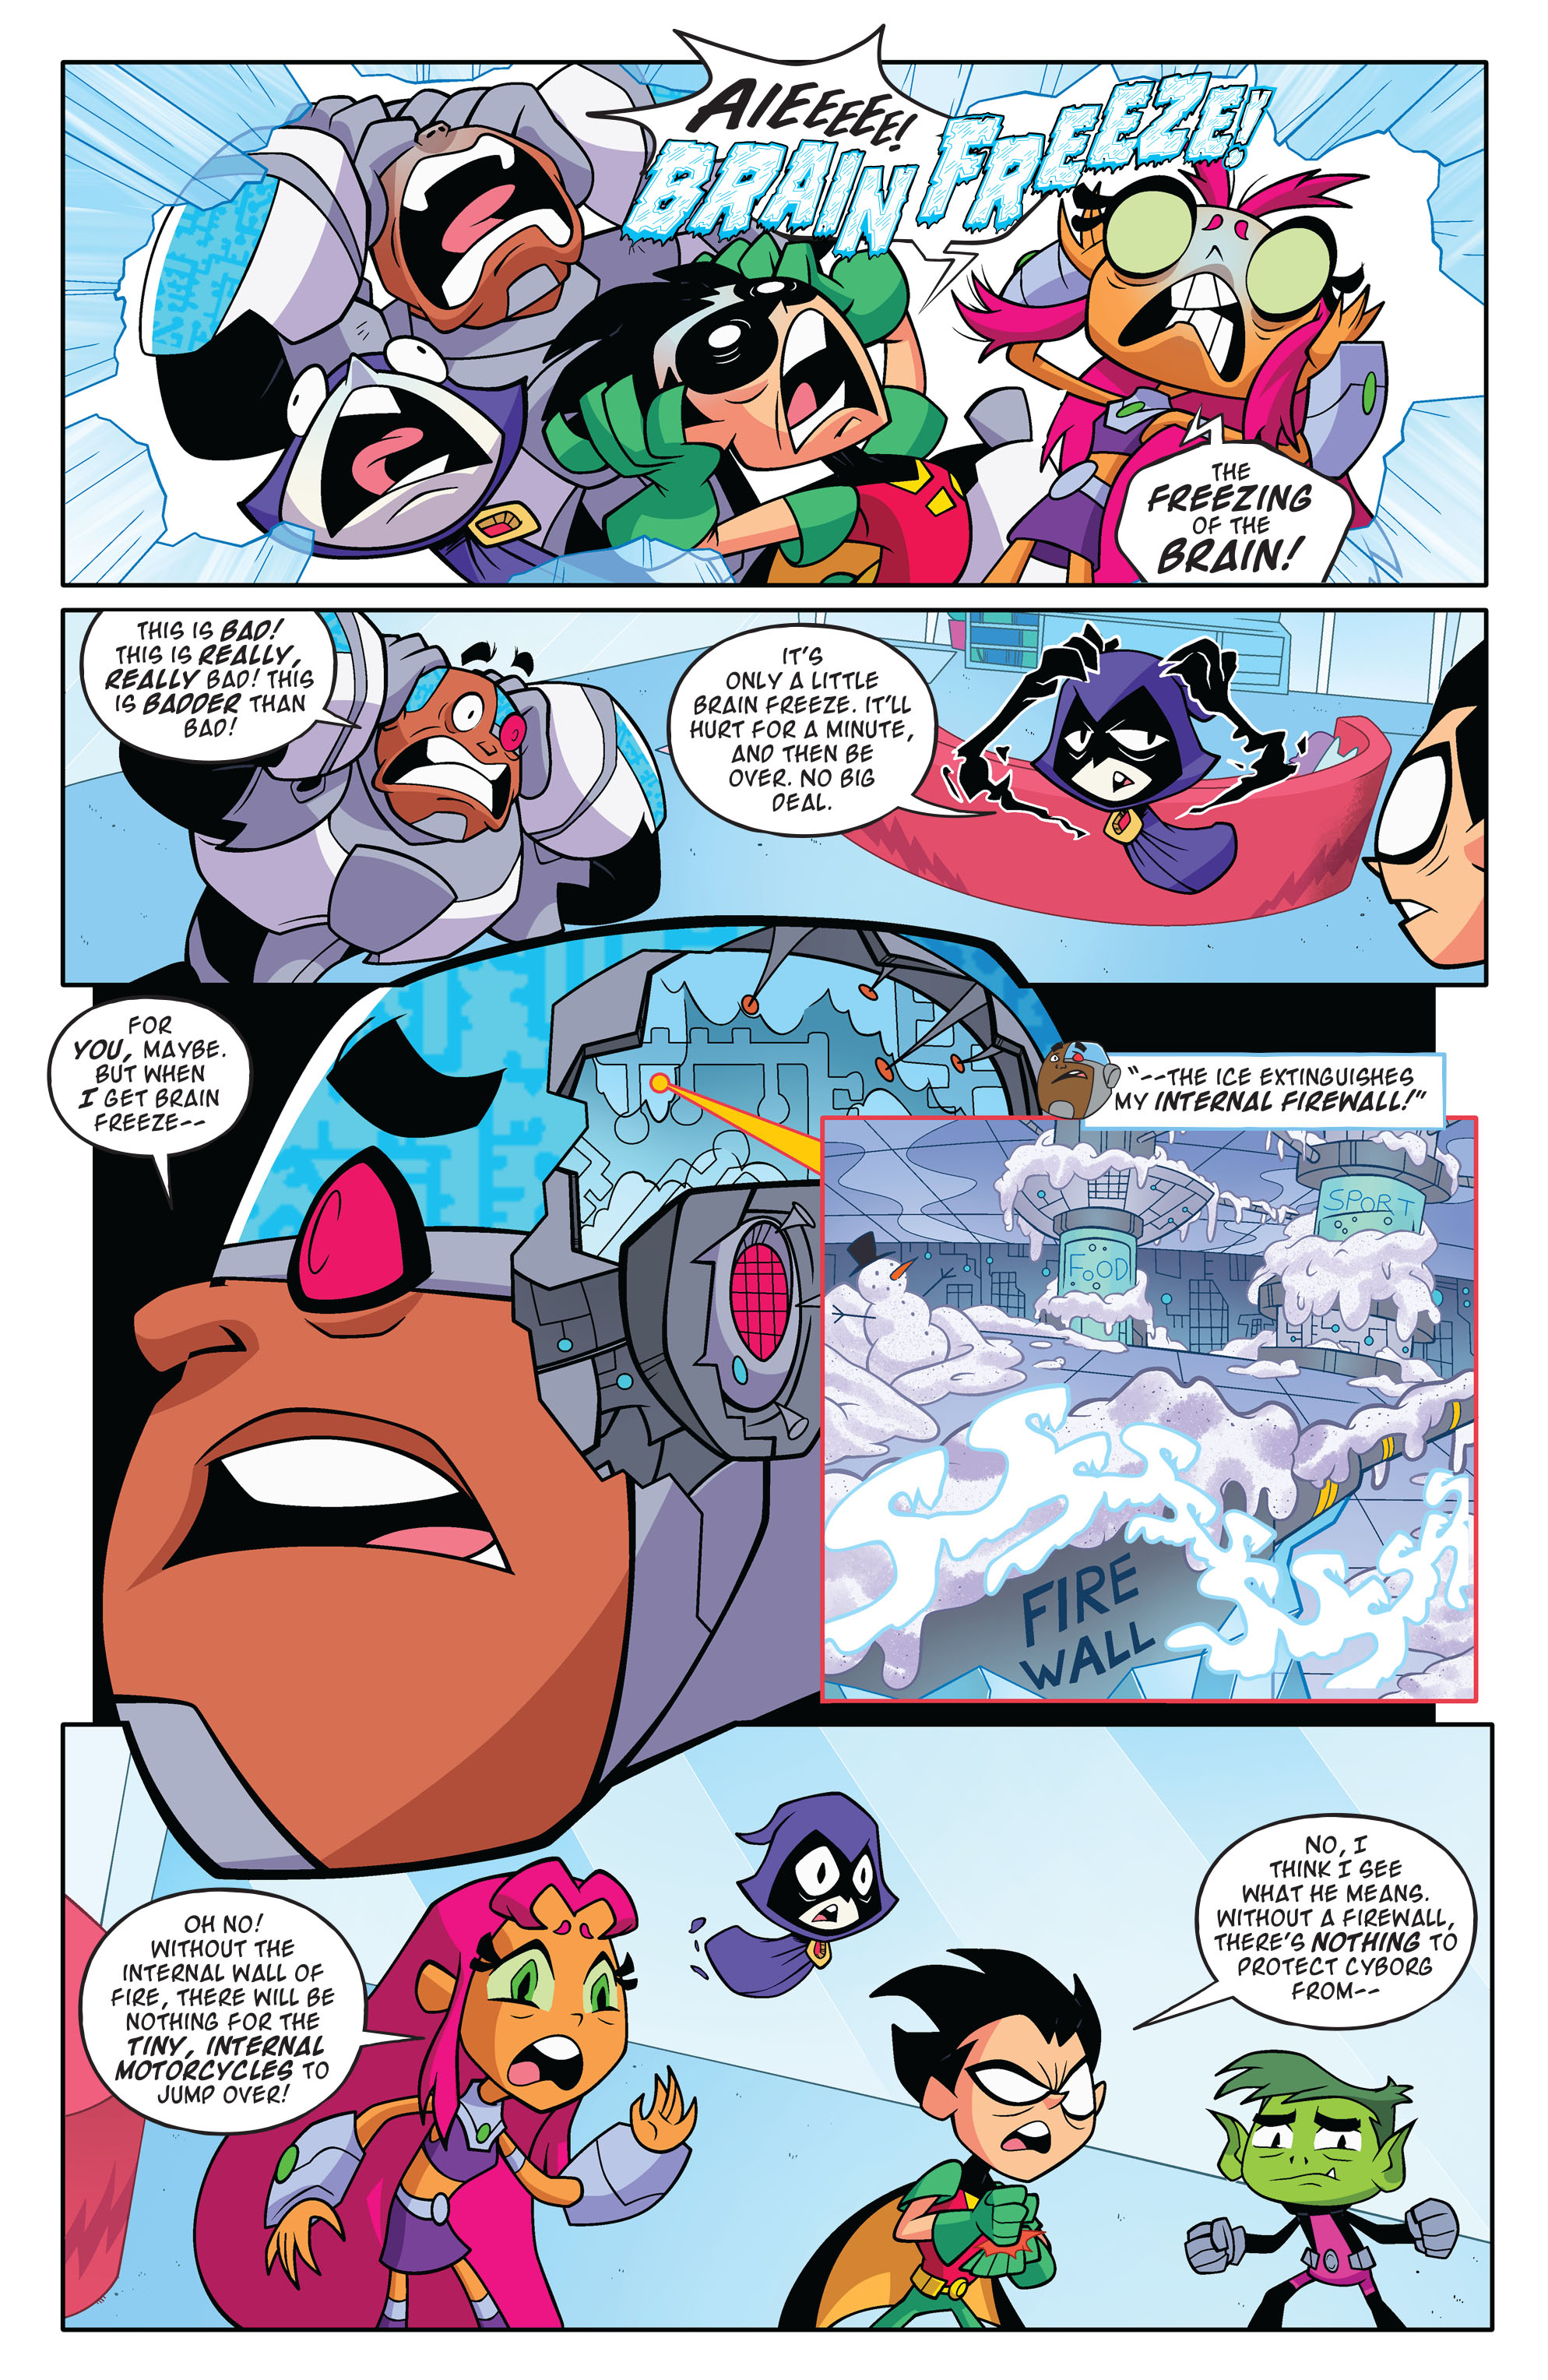 Teen Titans Go!: Booyah! (2020-): Chapter 4 - Page 3